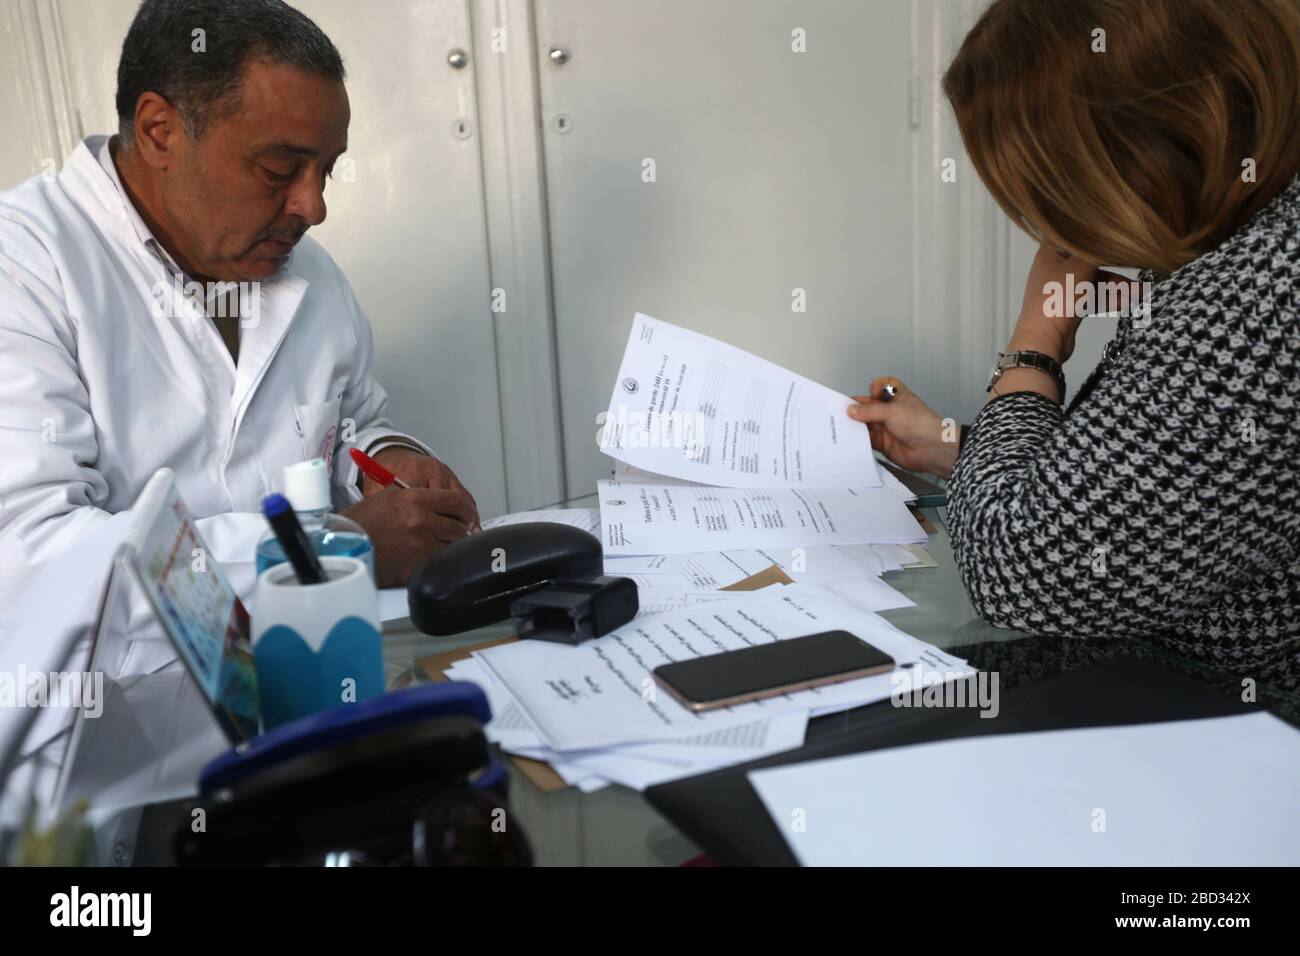 Tunis, Tunisia. 31st Mar, 2020. (L) CoViD-19 unity's supervisor and (R) Administrator director during the agents planification timing in the unity at the administration of the Habib Thameur Hospital on March 31, 2020 in Tunis, Tunisia. The Habib Thameur Hospital in Tunis, Tunisia has created a path for patients who need testing for the Covid-19 coronavirus. Daily, the Tunisian Ministry of Health performs around 700 Coronavirus tests and is working to reach 1000 tests soon. (Photo by Mohamed Krit/ Credit: Sipa USA/Alamy Live News Stock Photo